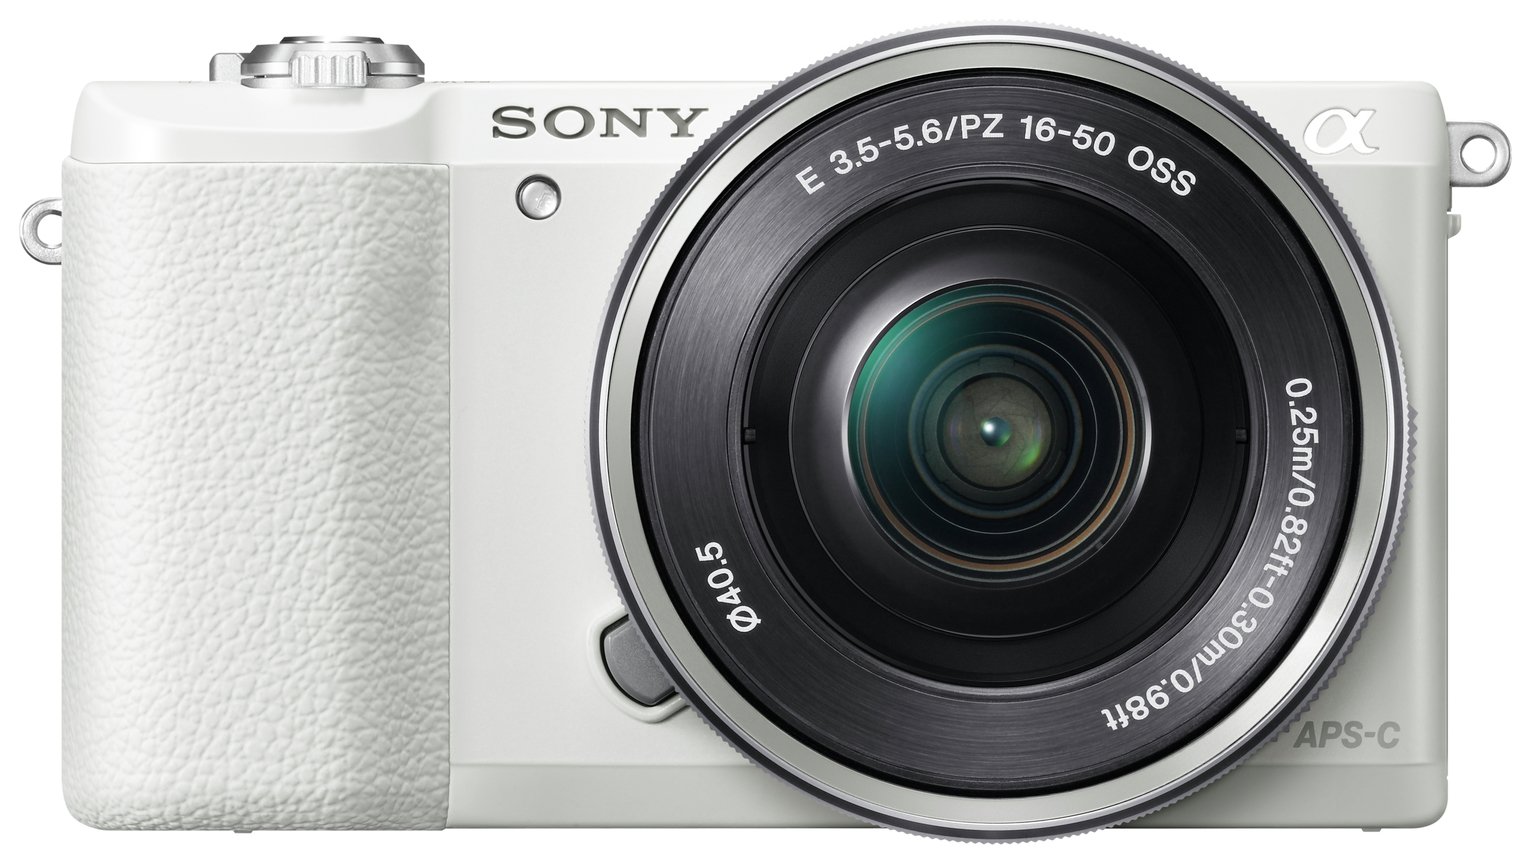 Sony A5100 Mirrorless Camera With 16-50mm Lens Review